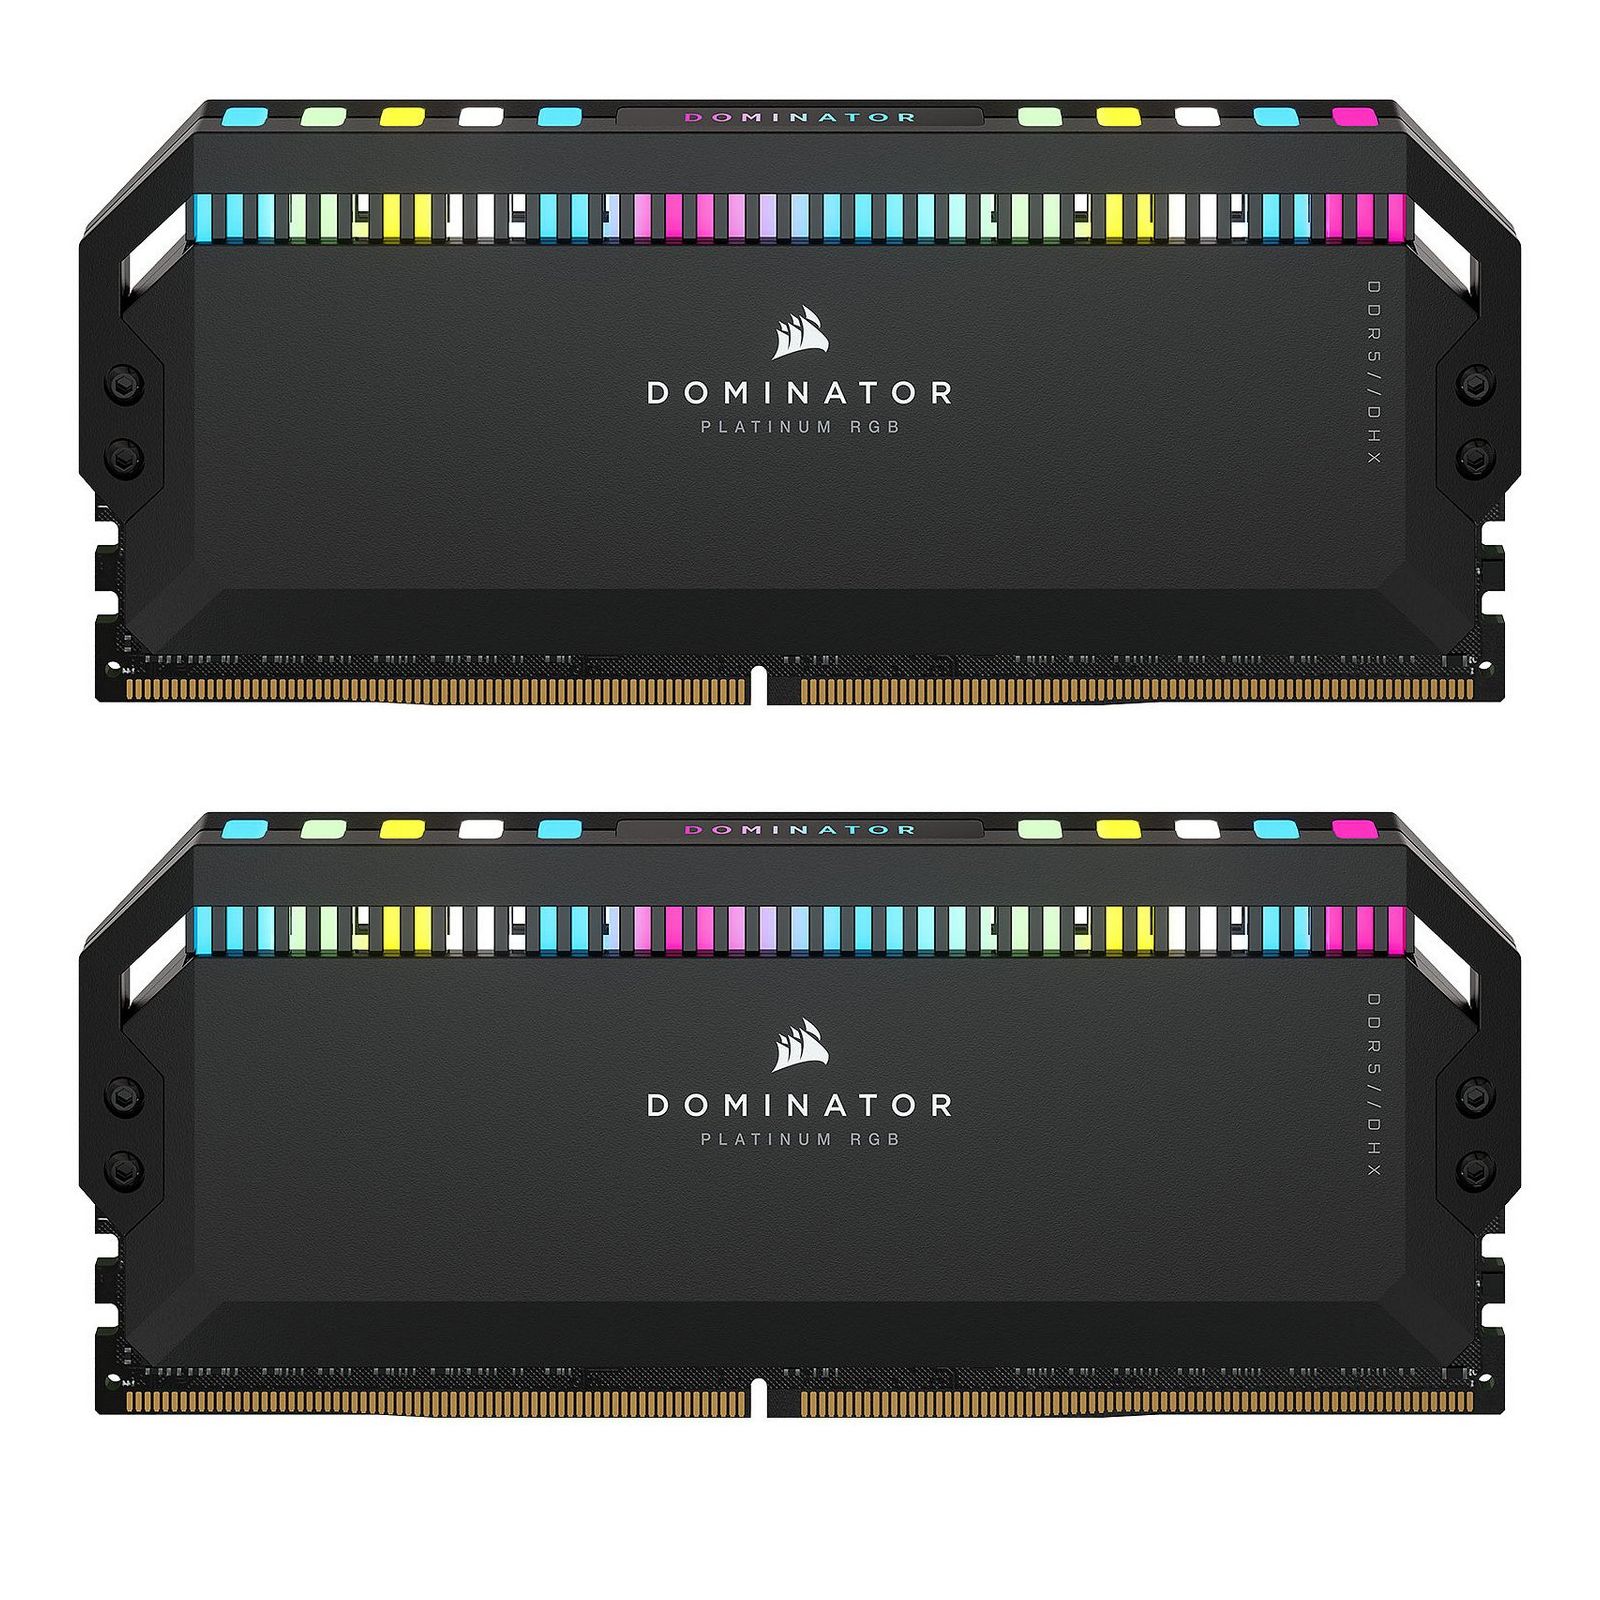 Memorie RAM DIMM Corsair DOMINATOR PLATINUM RGB 32GB (2x16GB) DDR5 DRAM 5200MHz C40 Memory Kit — Black  Fan Included No Memory Series DOMINATOR RGB DDR5 Memory Type DDR5 PMIC Type Overclock PMIC Memory Size 32GB (2 x 16GB) Tested Latency 40-40-40-77 Tested Voltage 1.25 Tested Speed 5200  Memory_1